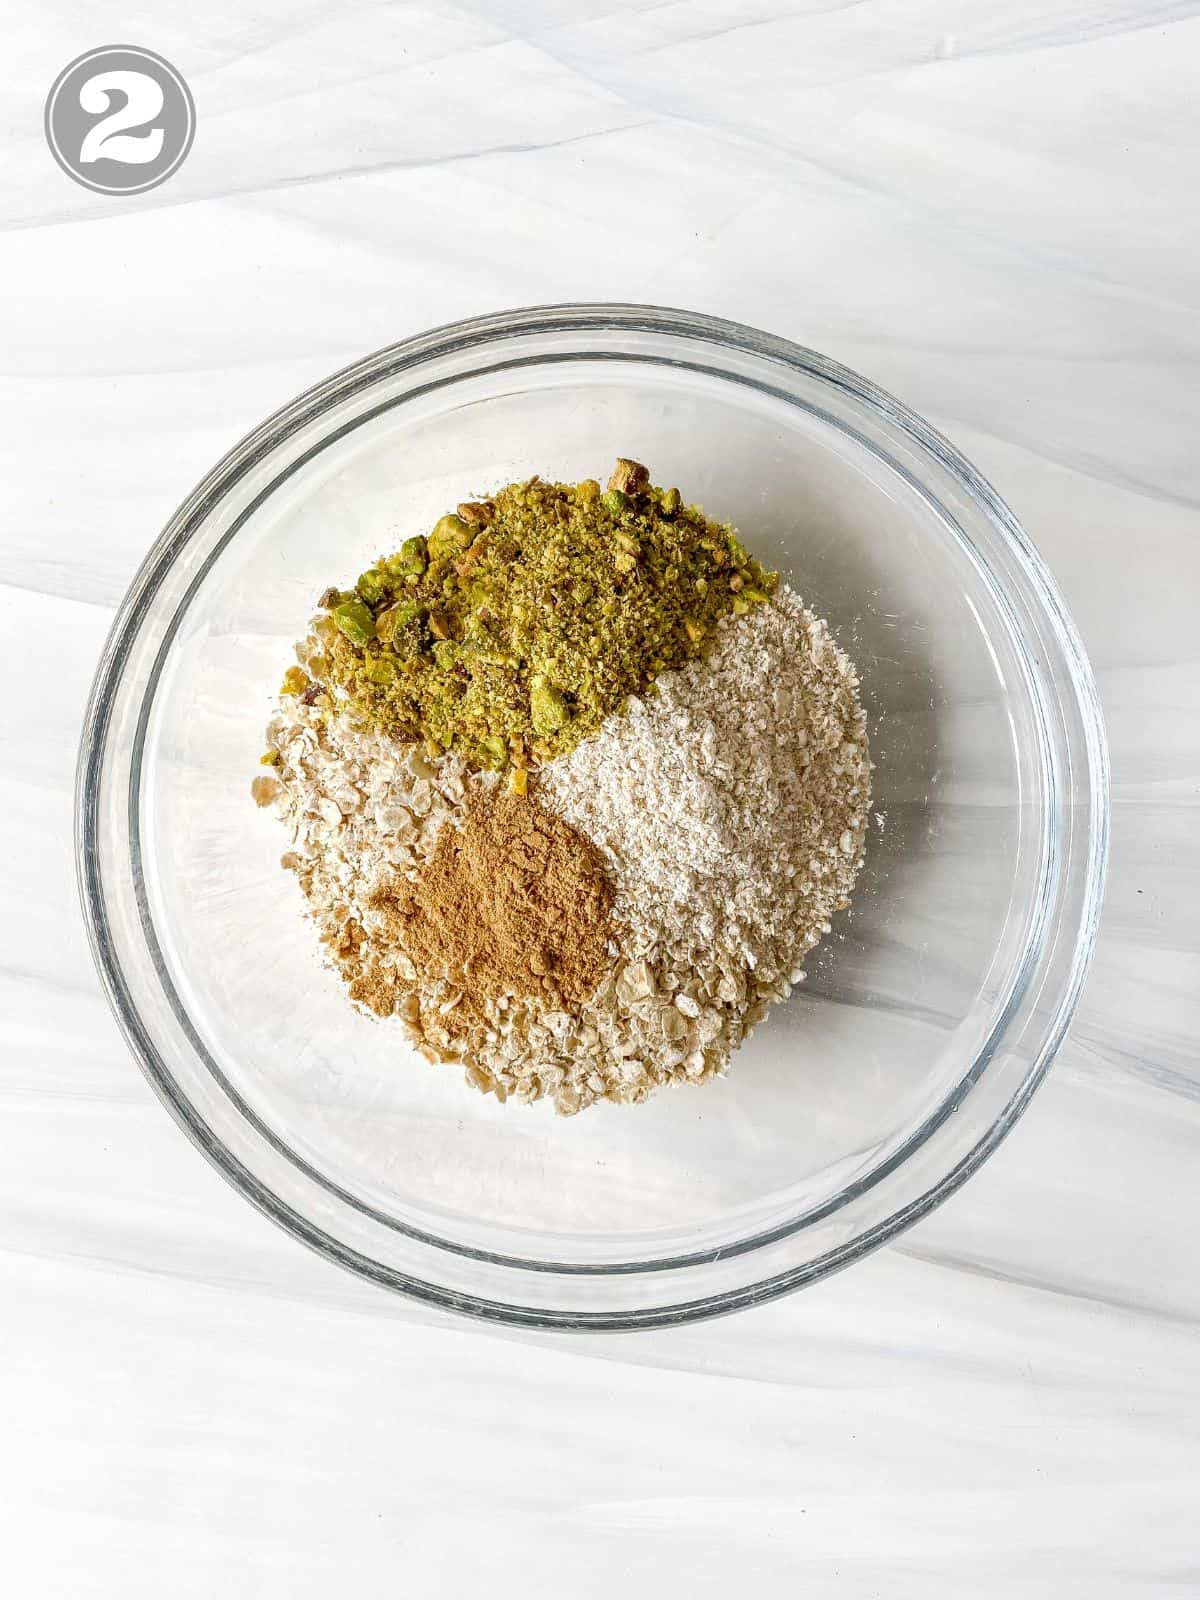 oats, ginger powder and pistachios in a glass bowl.